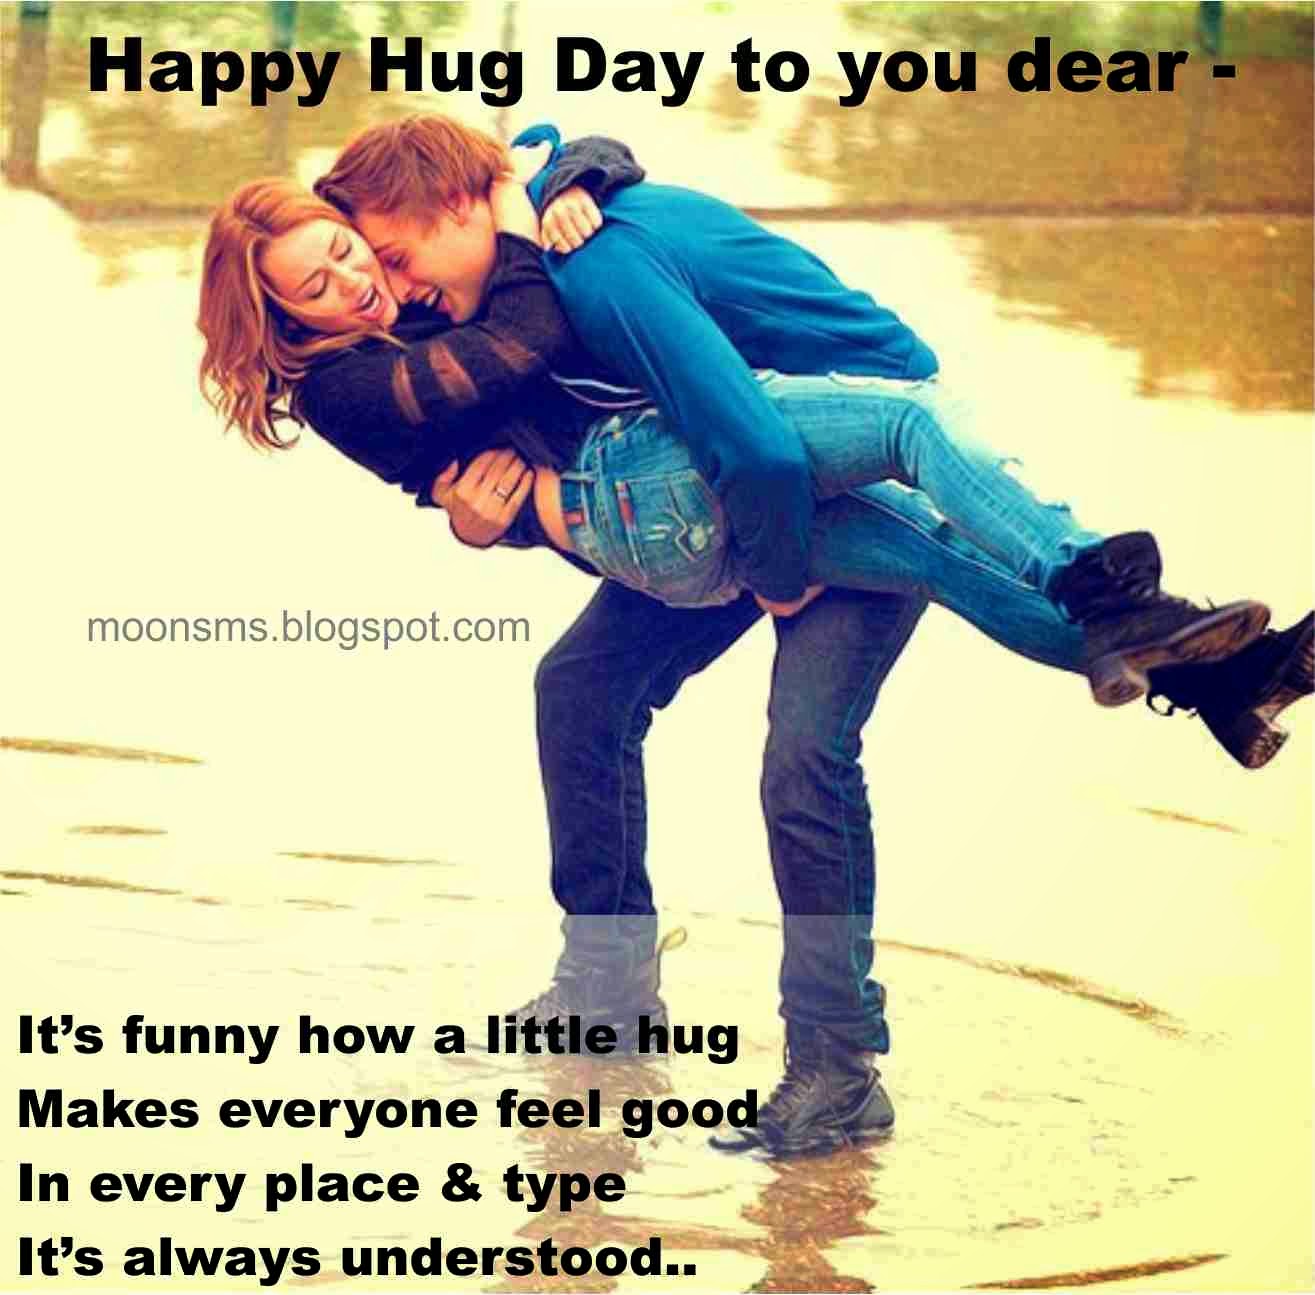 Happy Hug Day sms text message wishes quotes Hug day HD anjmted image picture photo wallpaper greetings card english hindi to girlfriend boyfriend